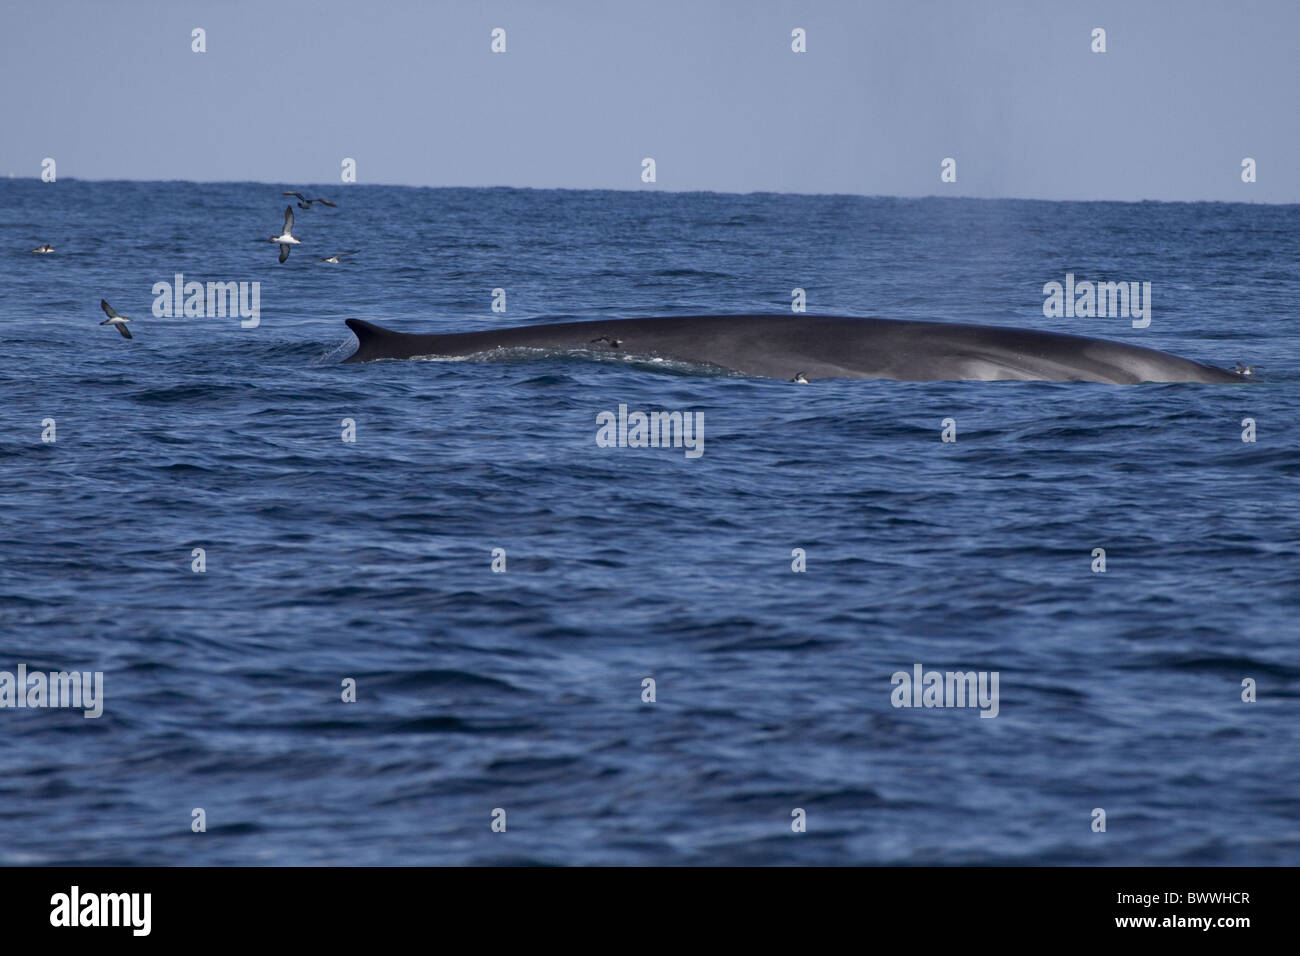 Fin Whale with Manx Shearwaters off coast Wales Stock Photo